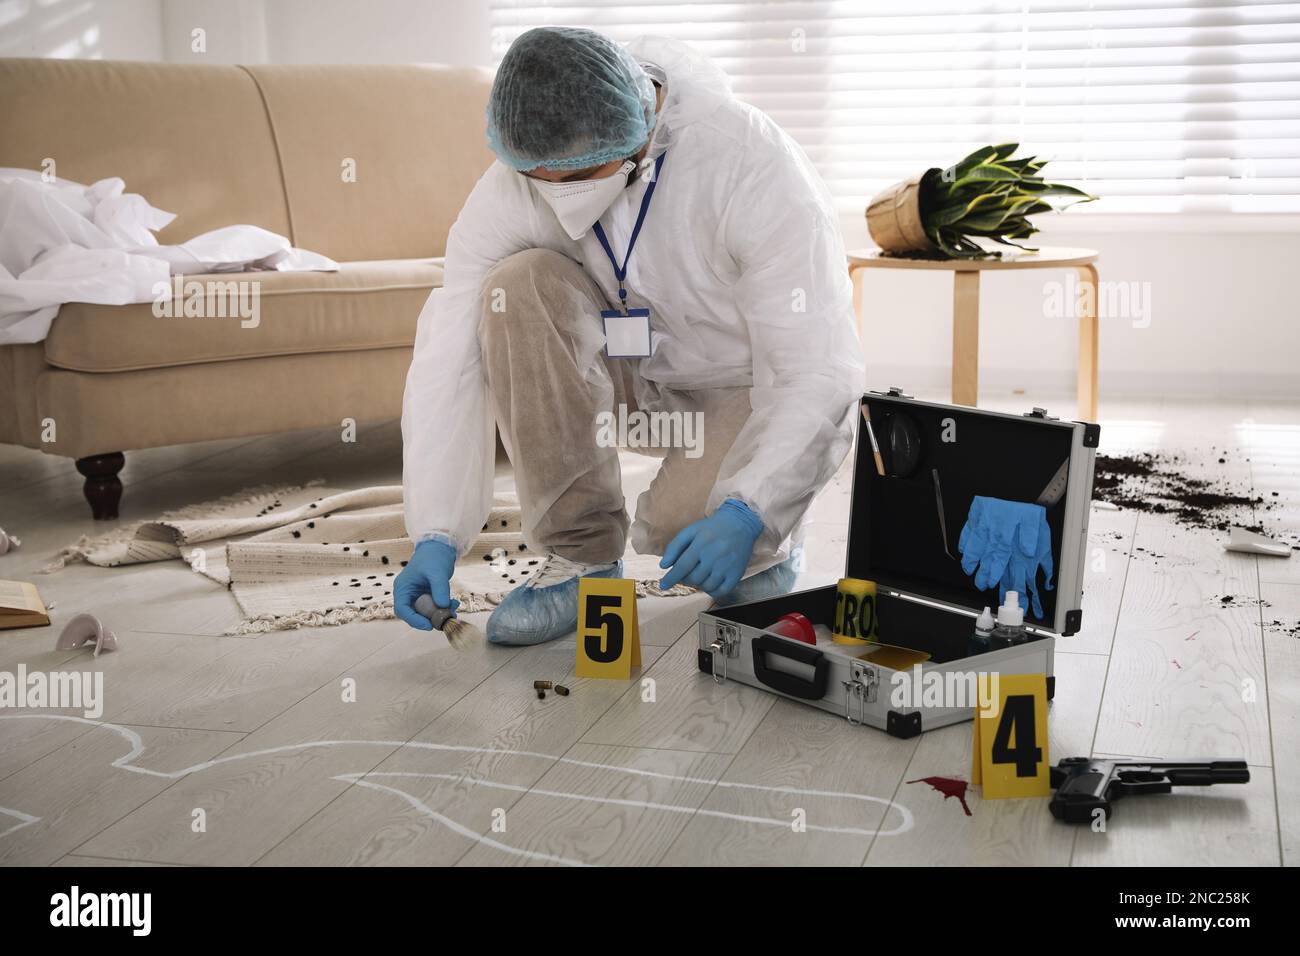 Investigator in protective suit working at crime scene Stock Photo